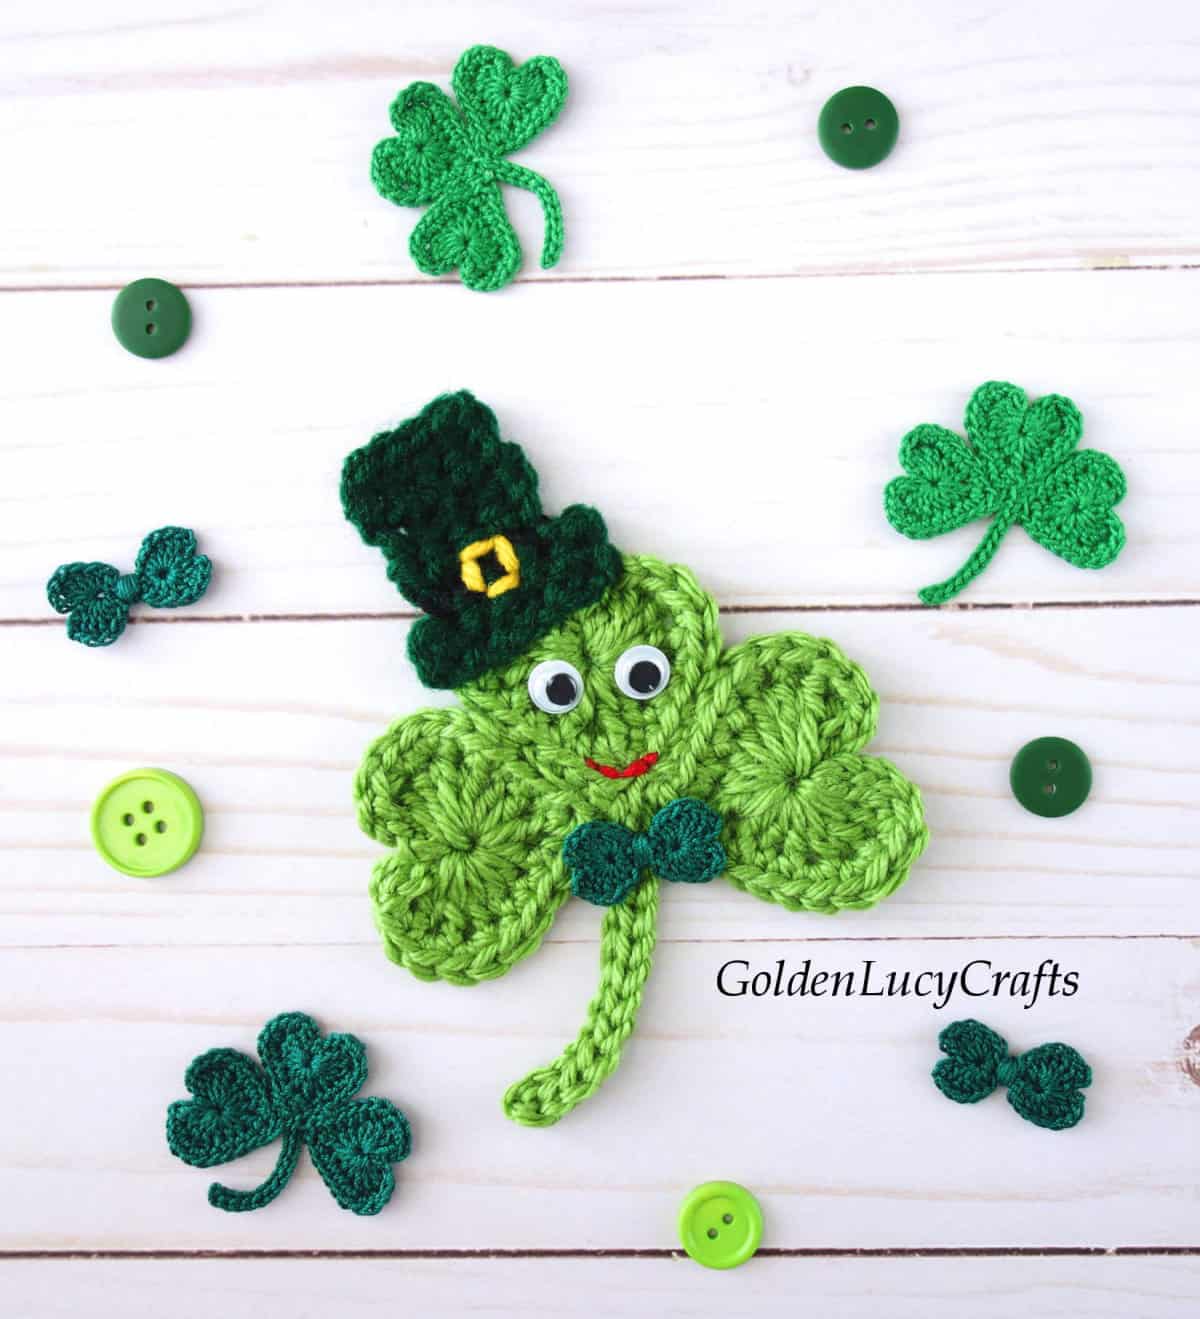 Large crocheted shamrock in a hat in a middle, small shamrocks and green buttons around.